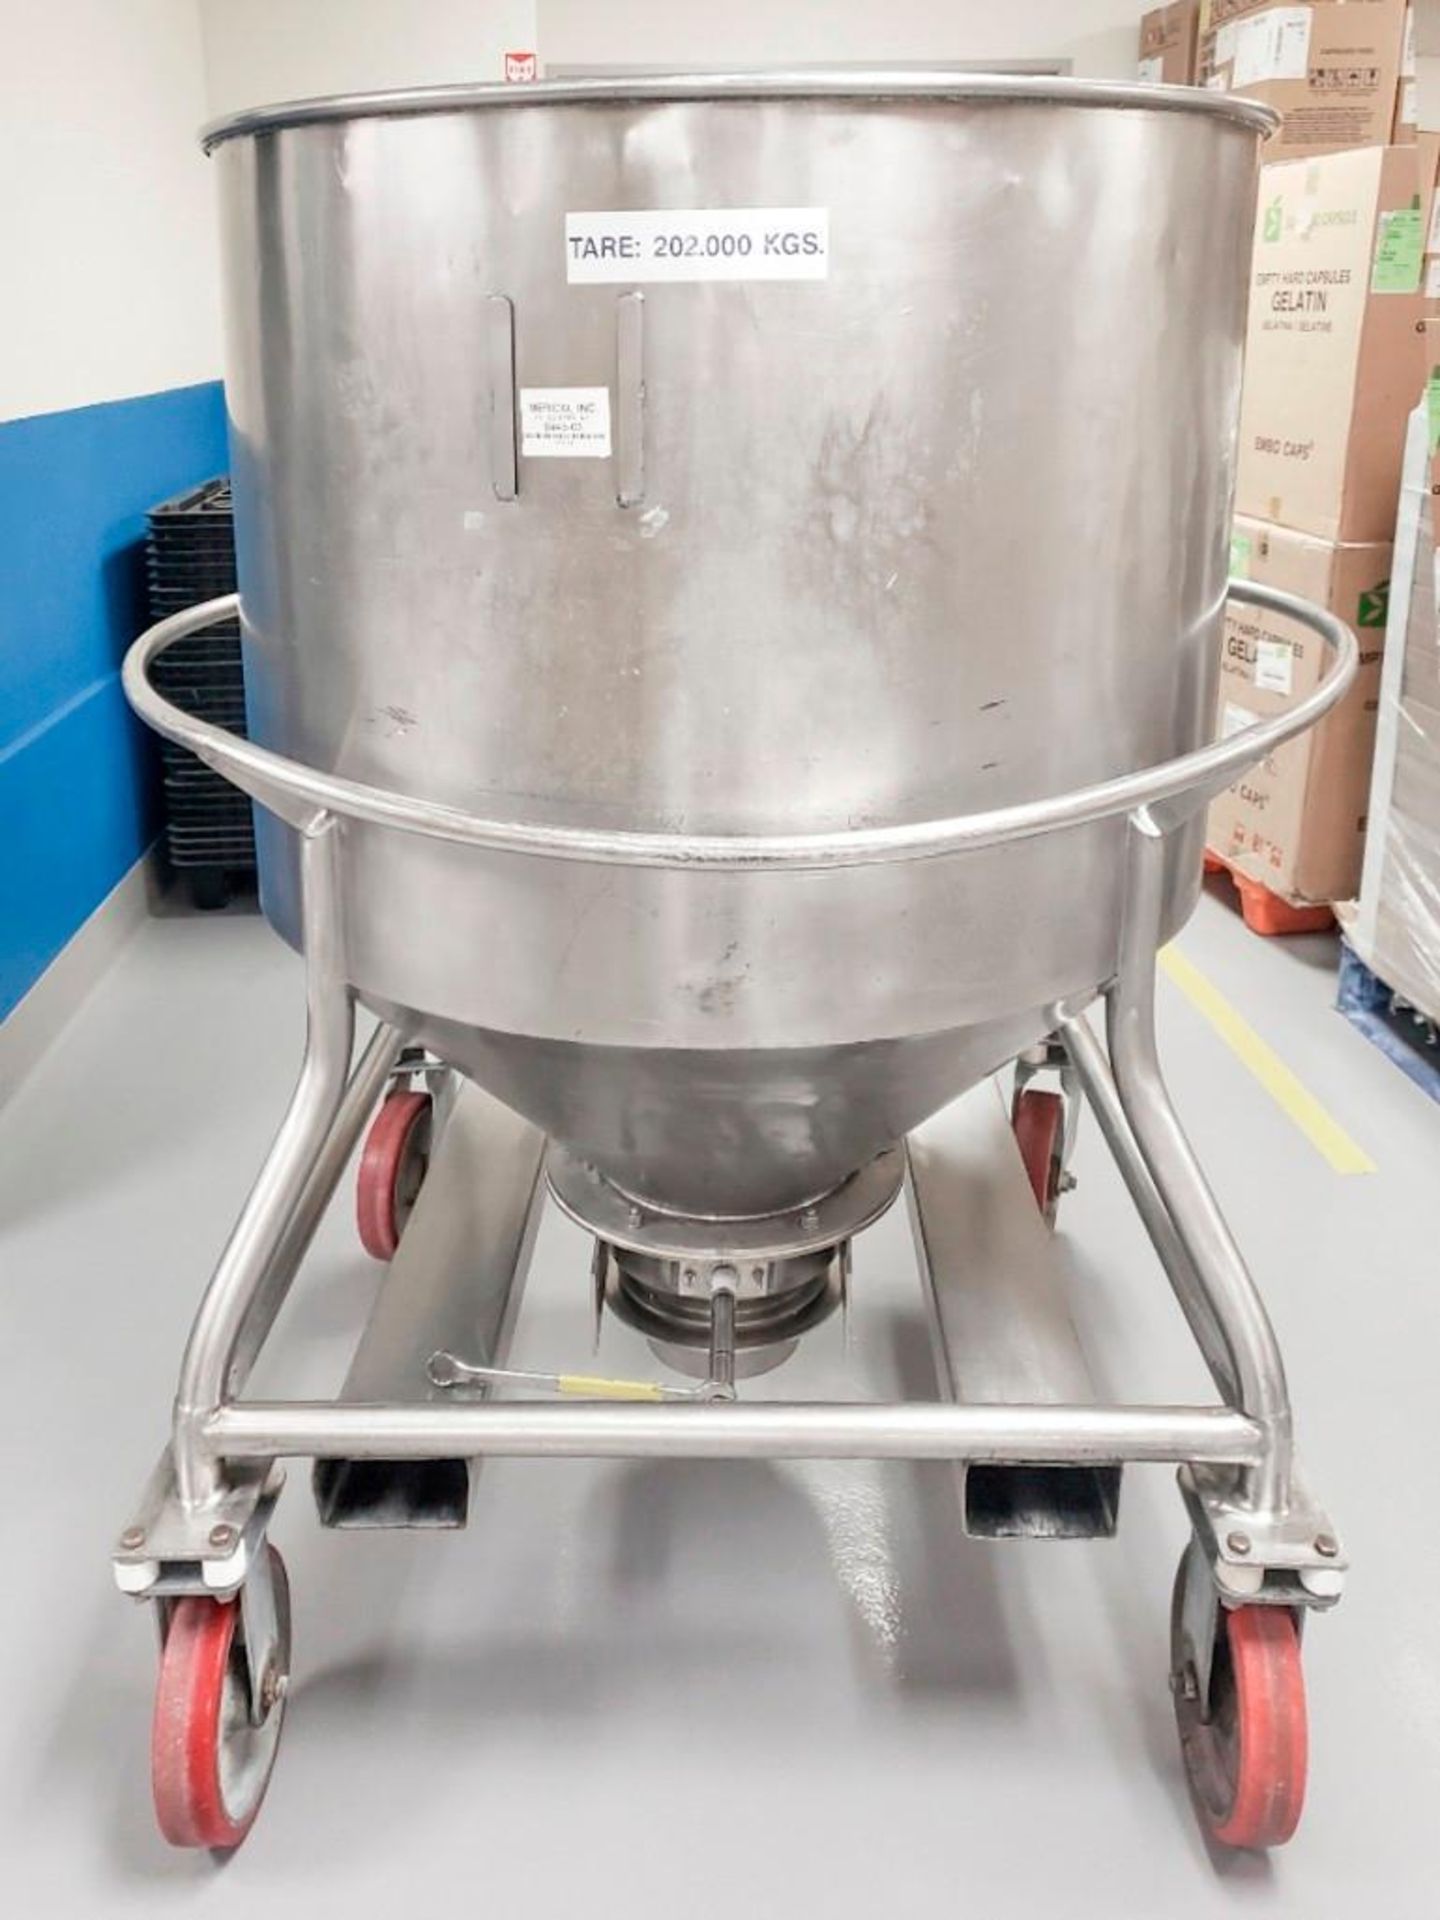 700Kg Capacity Charge Kettle - Image 8 of 12